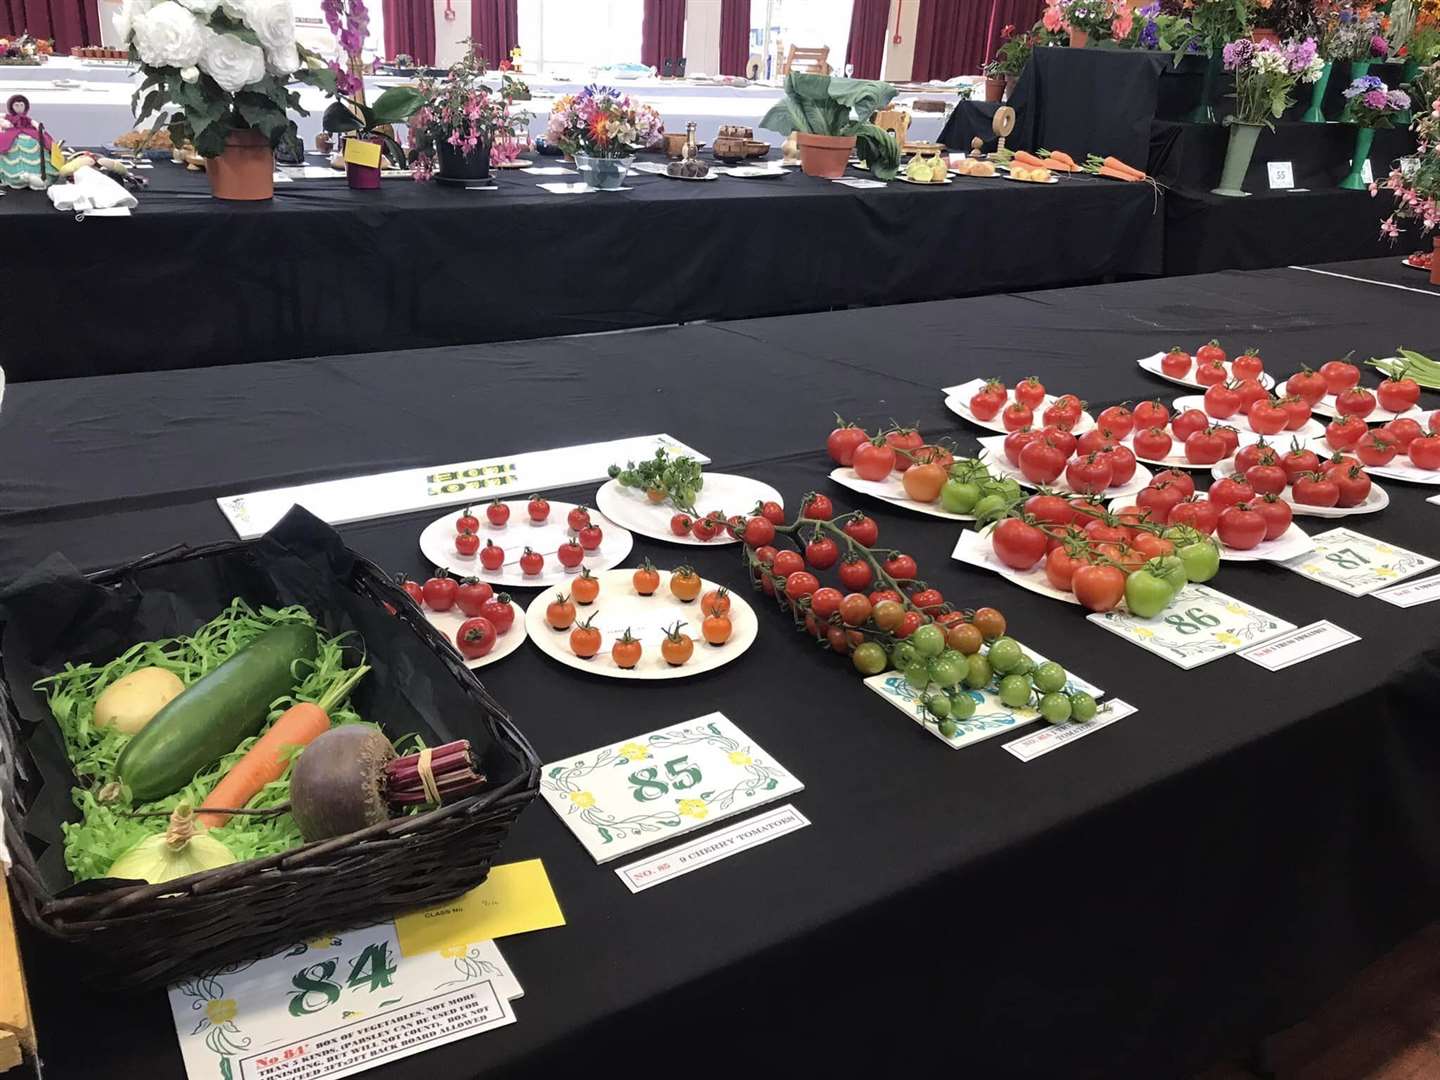 Fruit and vegetable entries at the 2022 show.